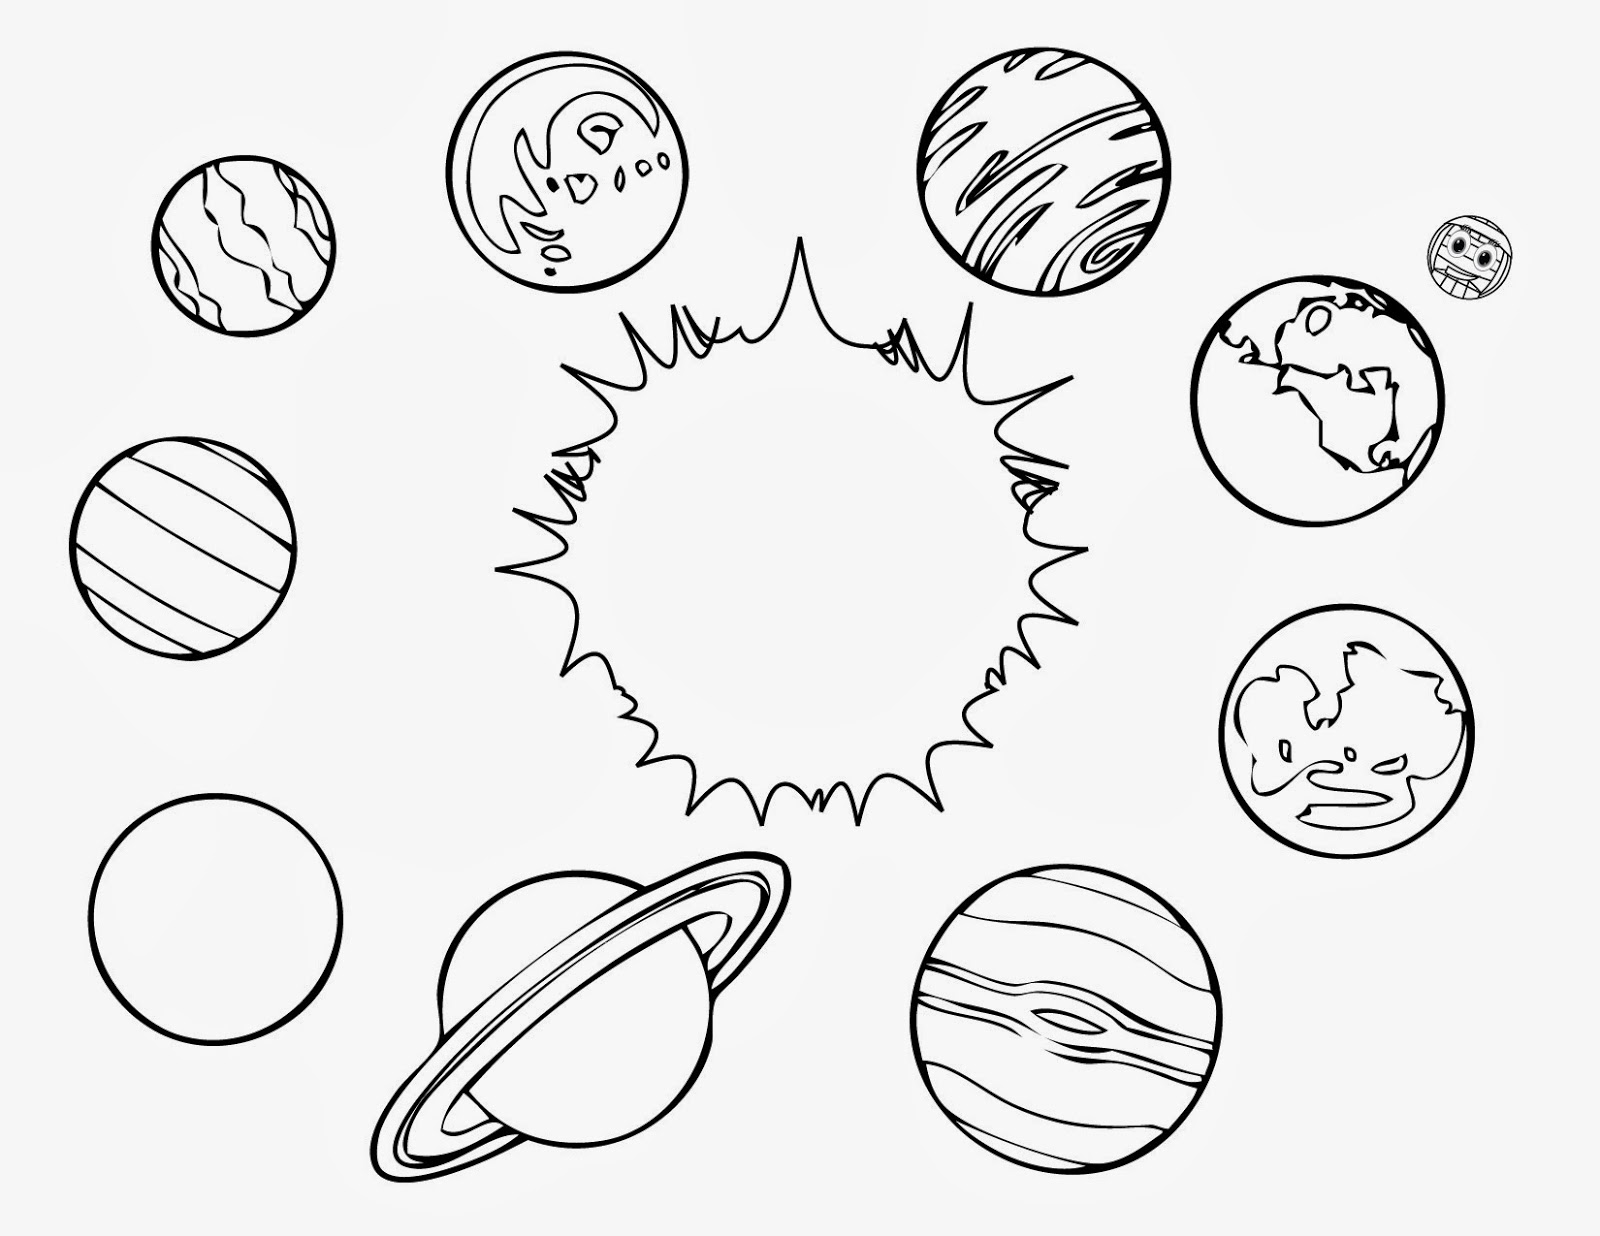 space-coloring-pages-3-coloring-pages-to-print